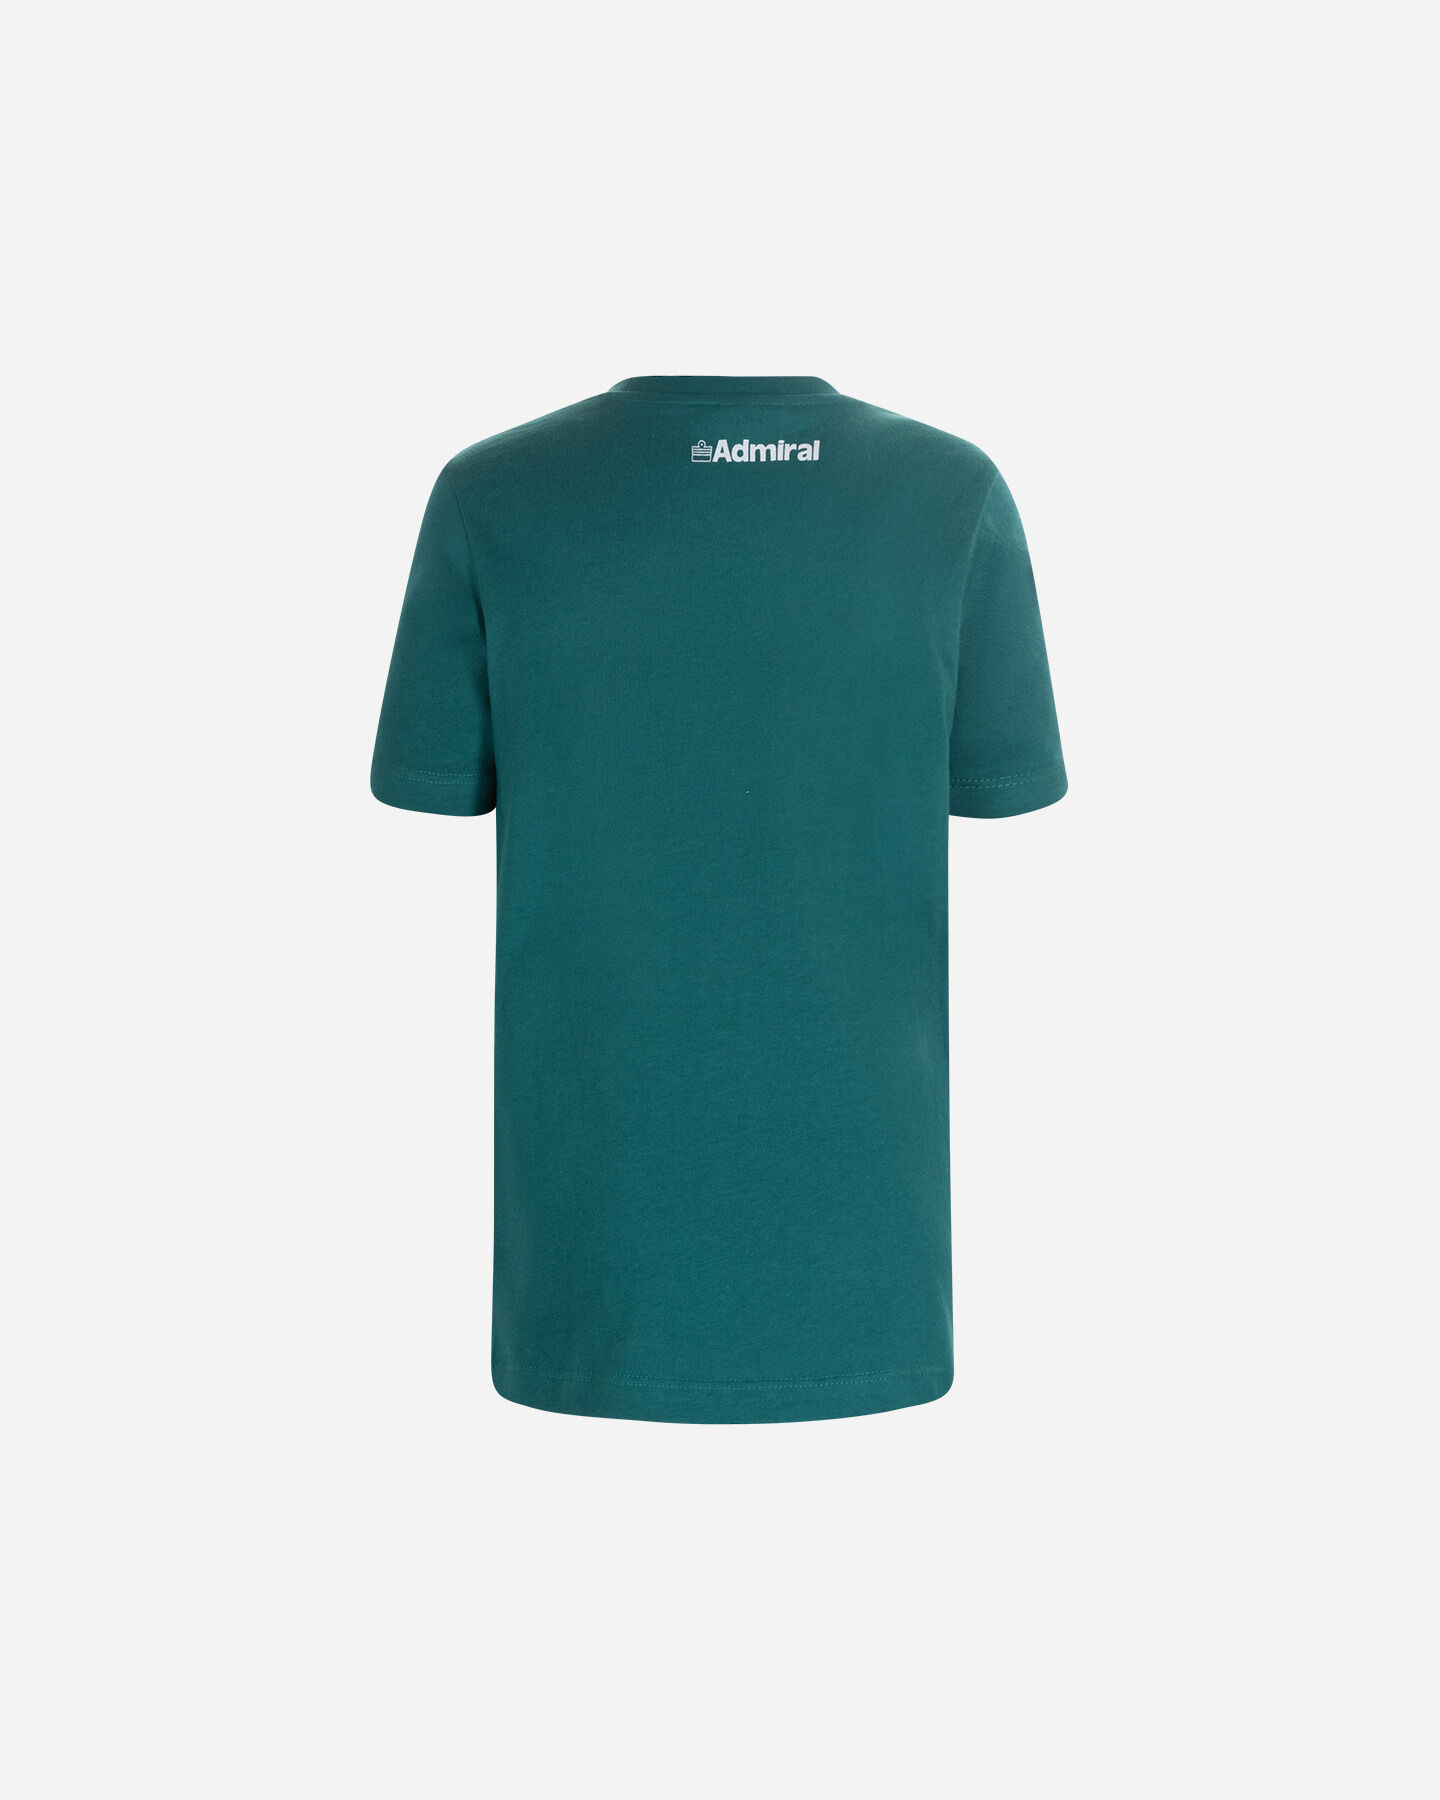  T-Shirt ADMIRAL BASIC SPORT JR S4119898|789|6A scatto 1